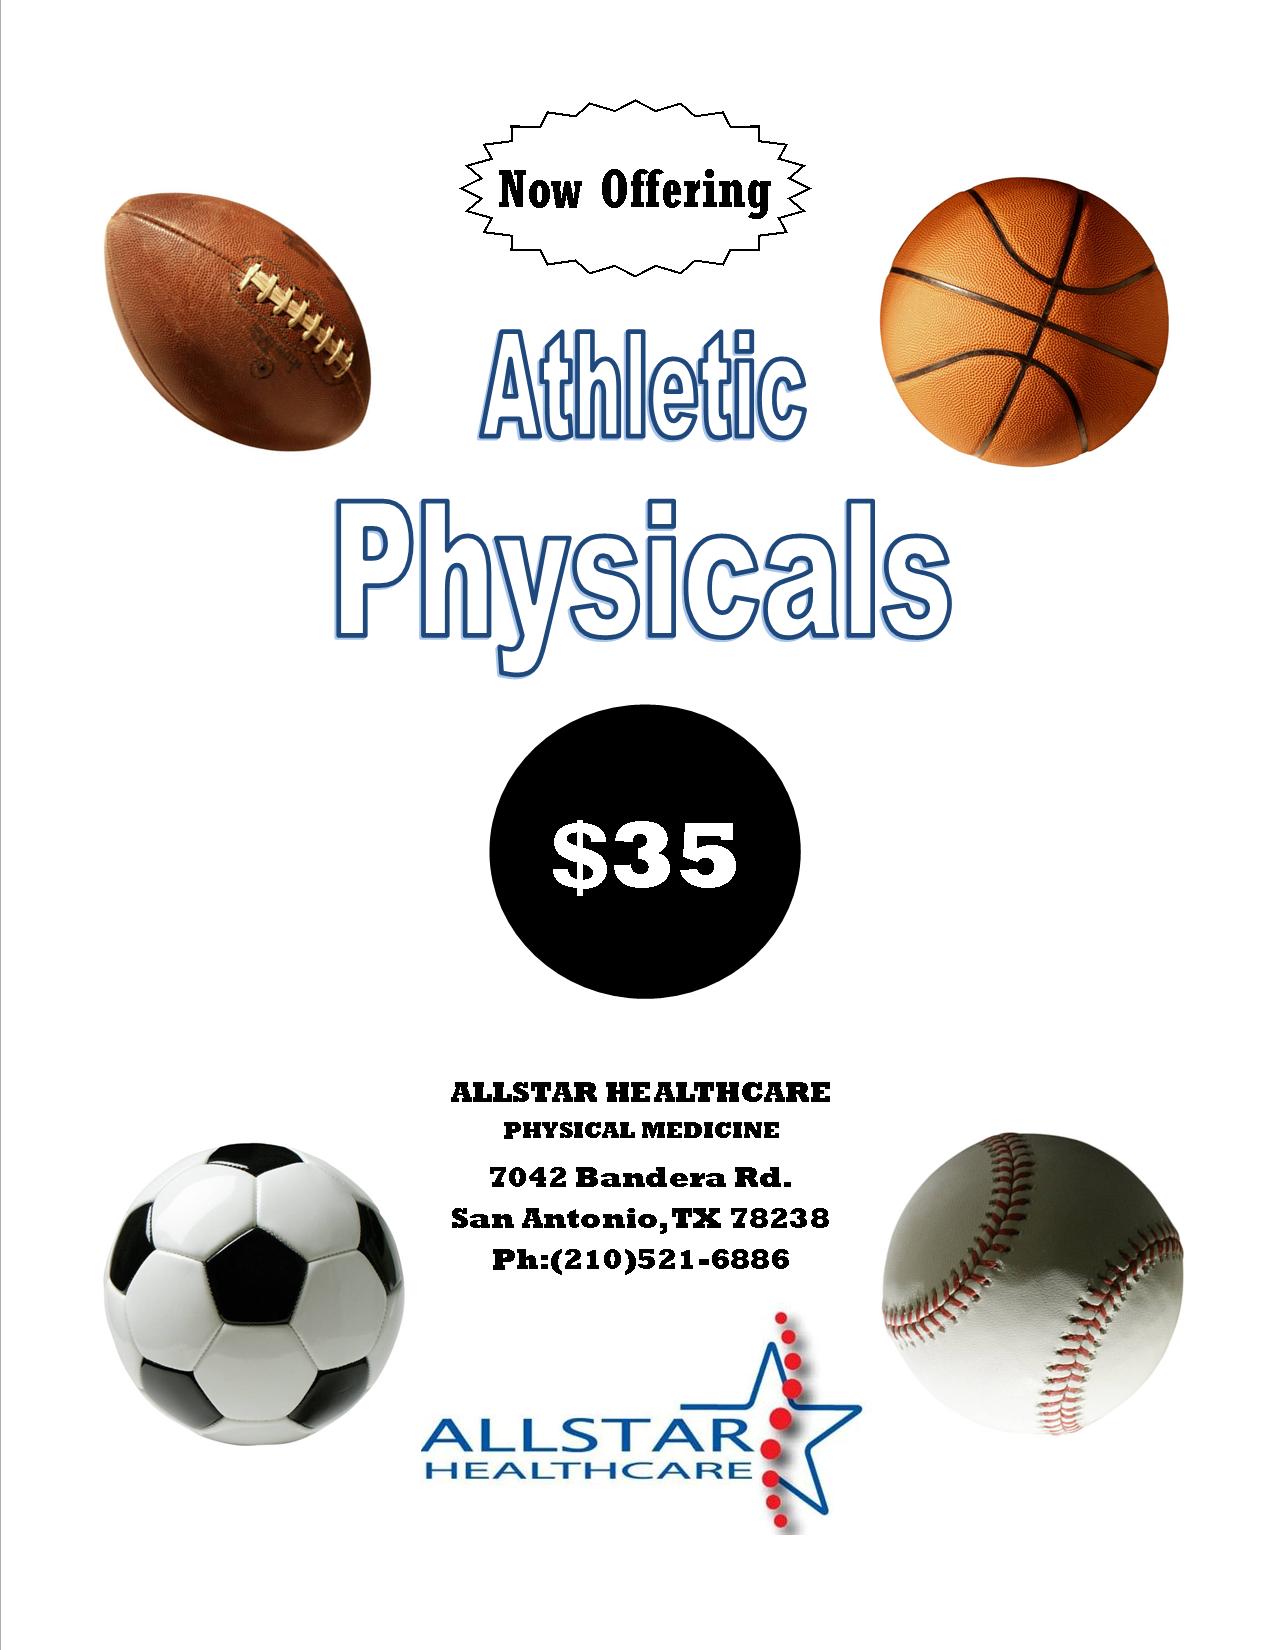 Now Offering Sports Physicals! Allstar Healthcare Physical Medicine